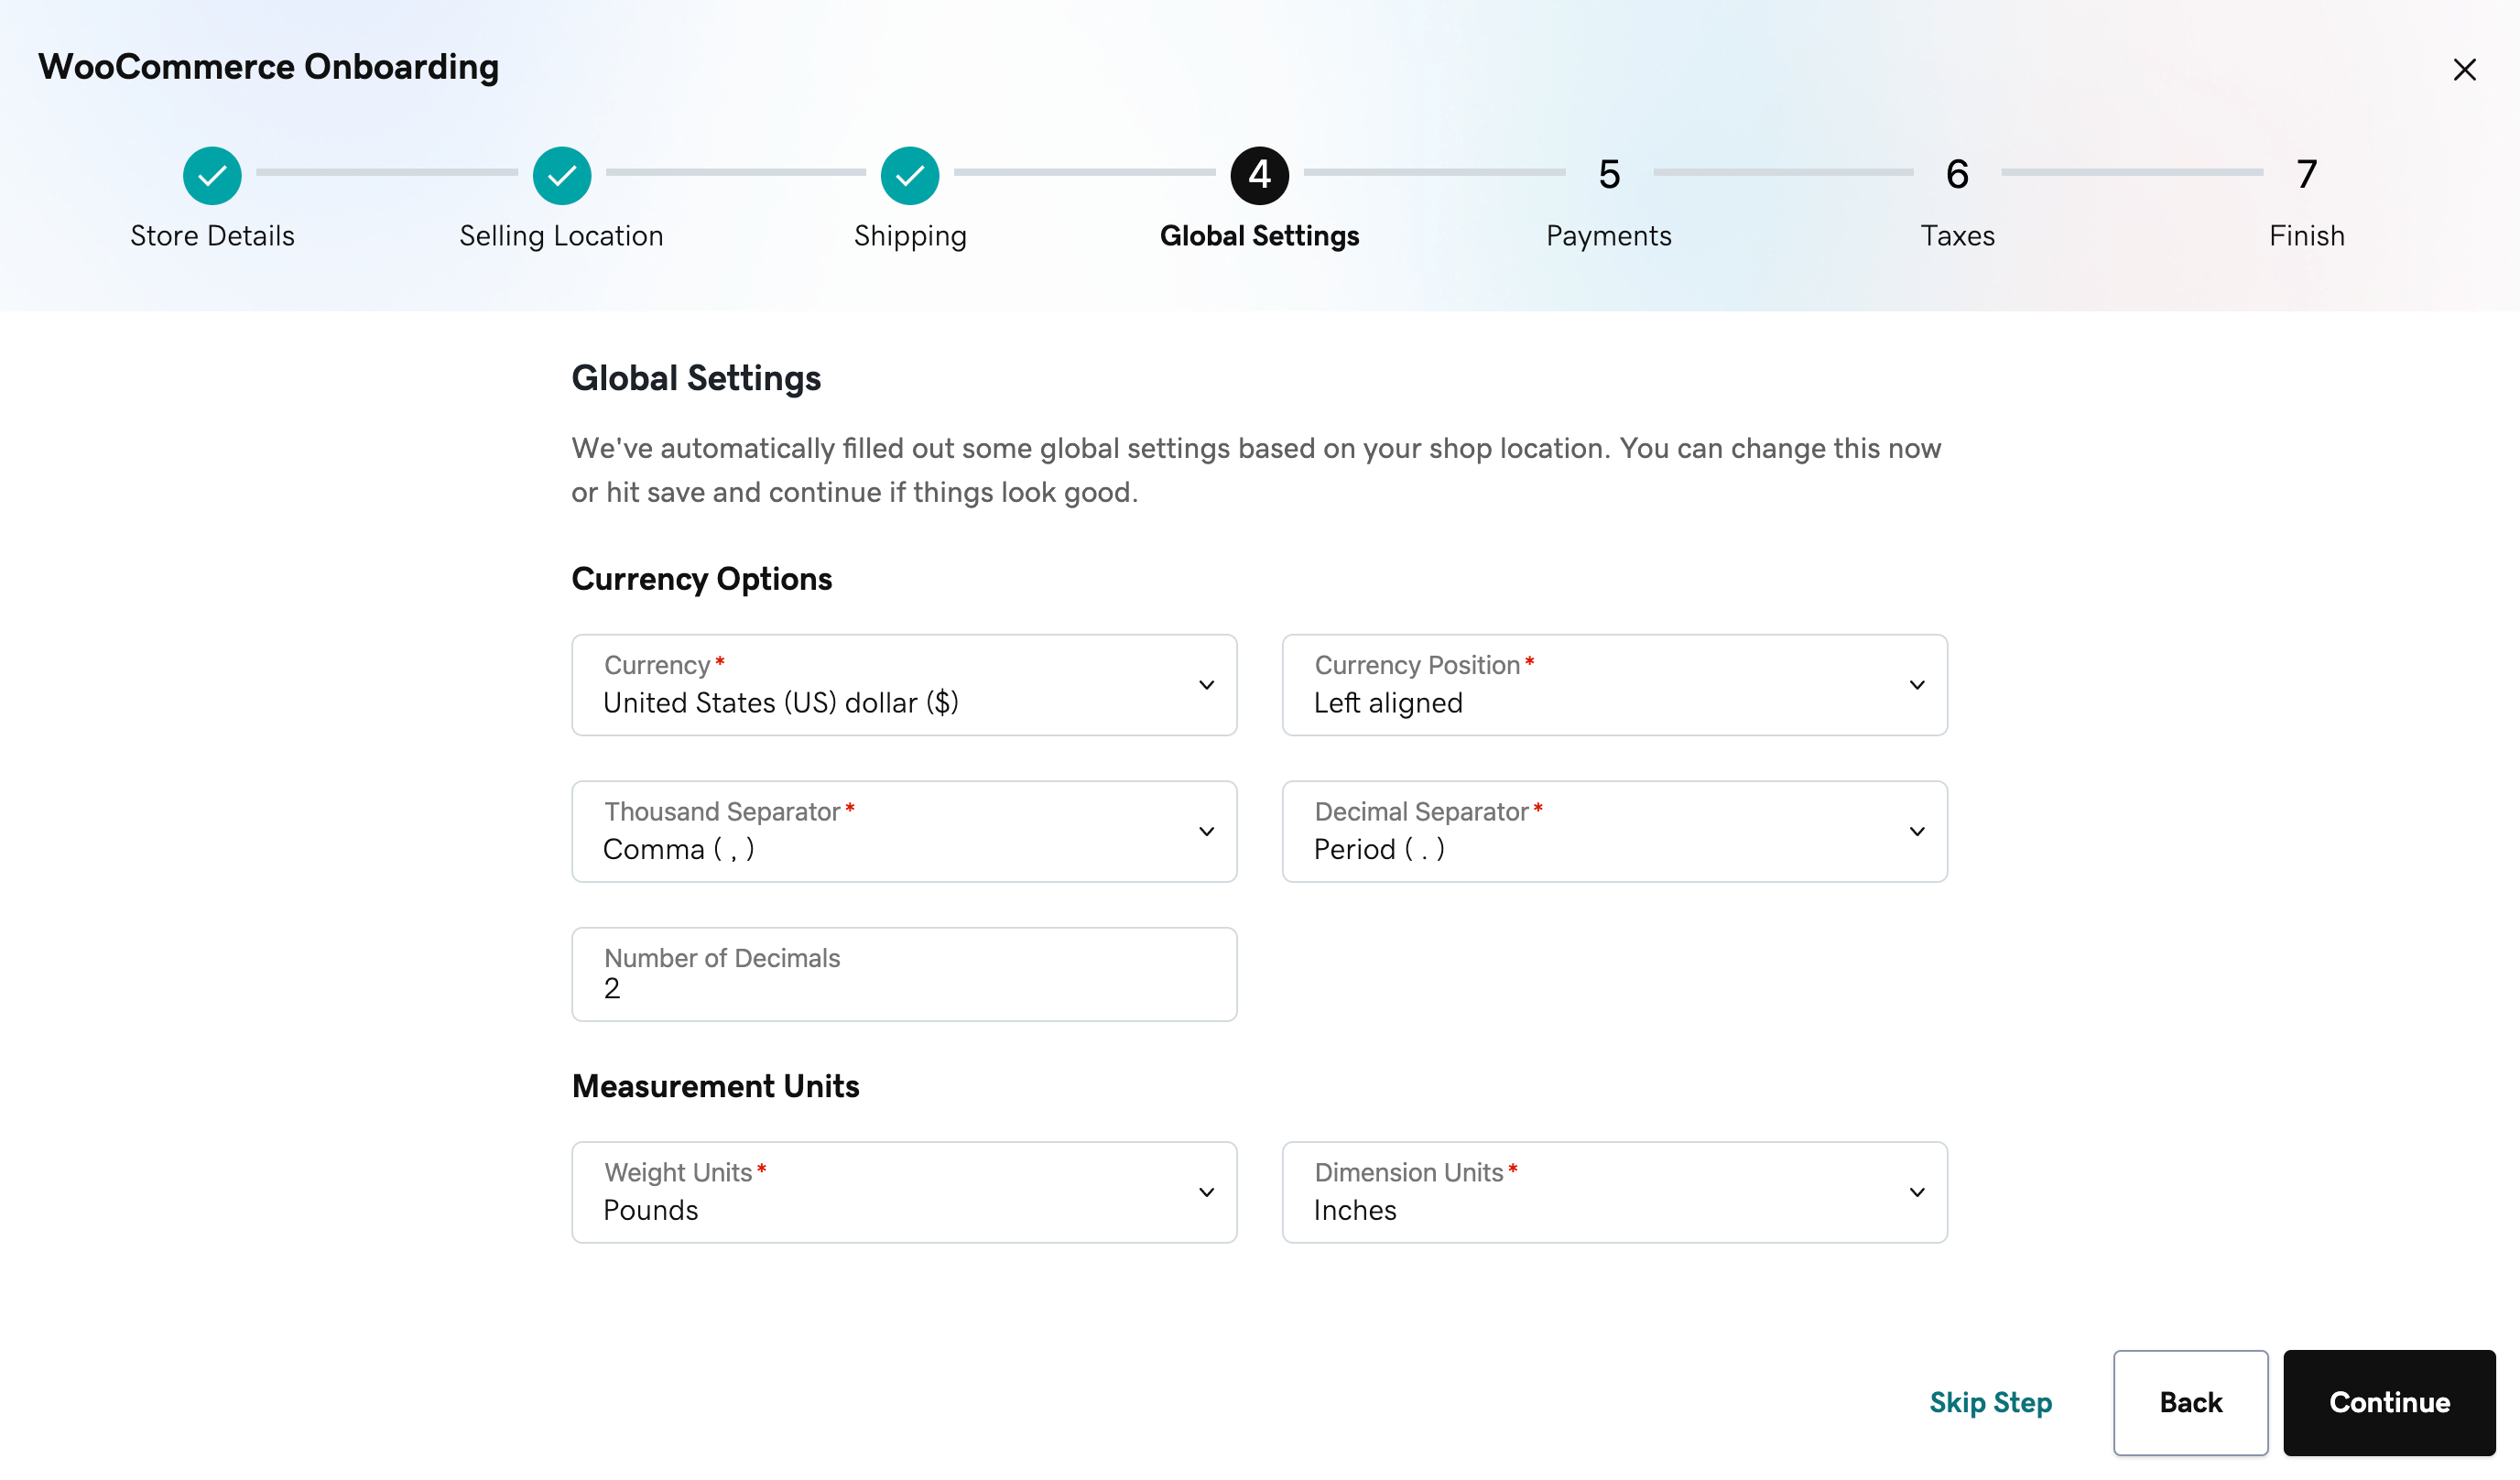 Options to configure the currency options and measurement units through the onboarding wizard